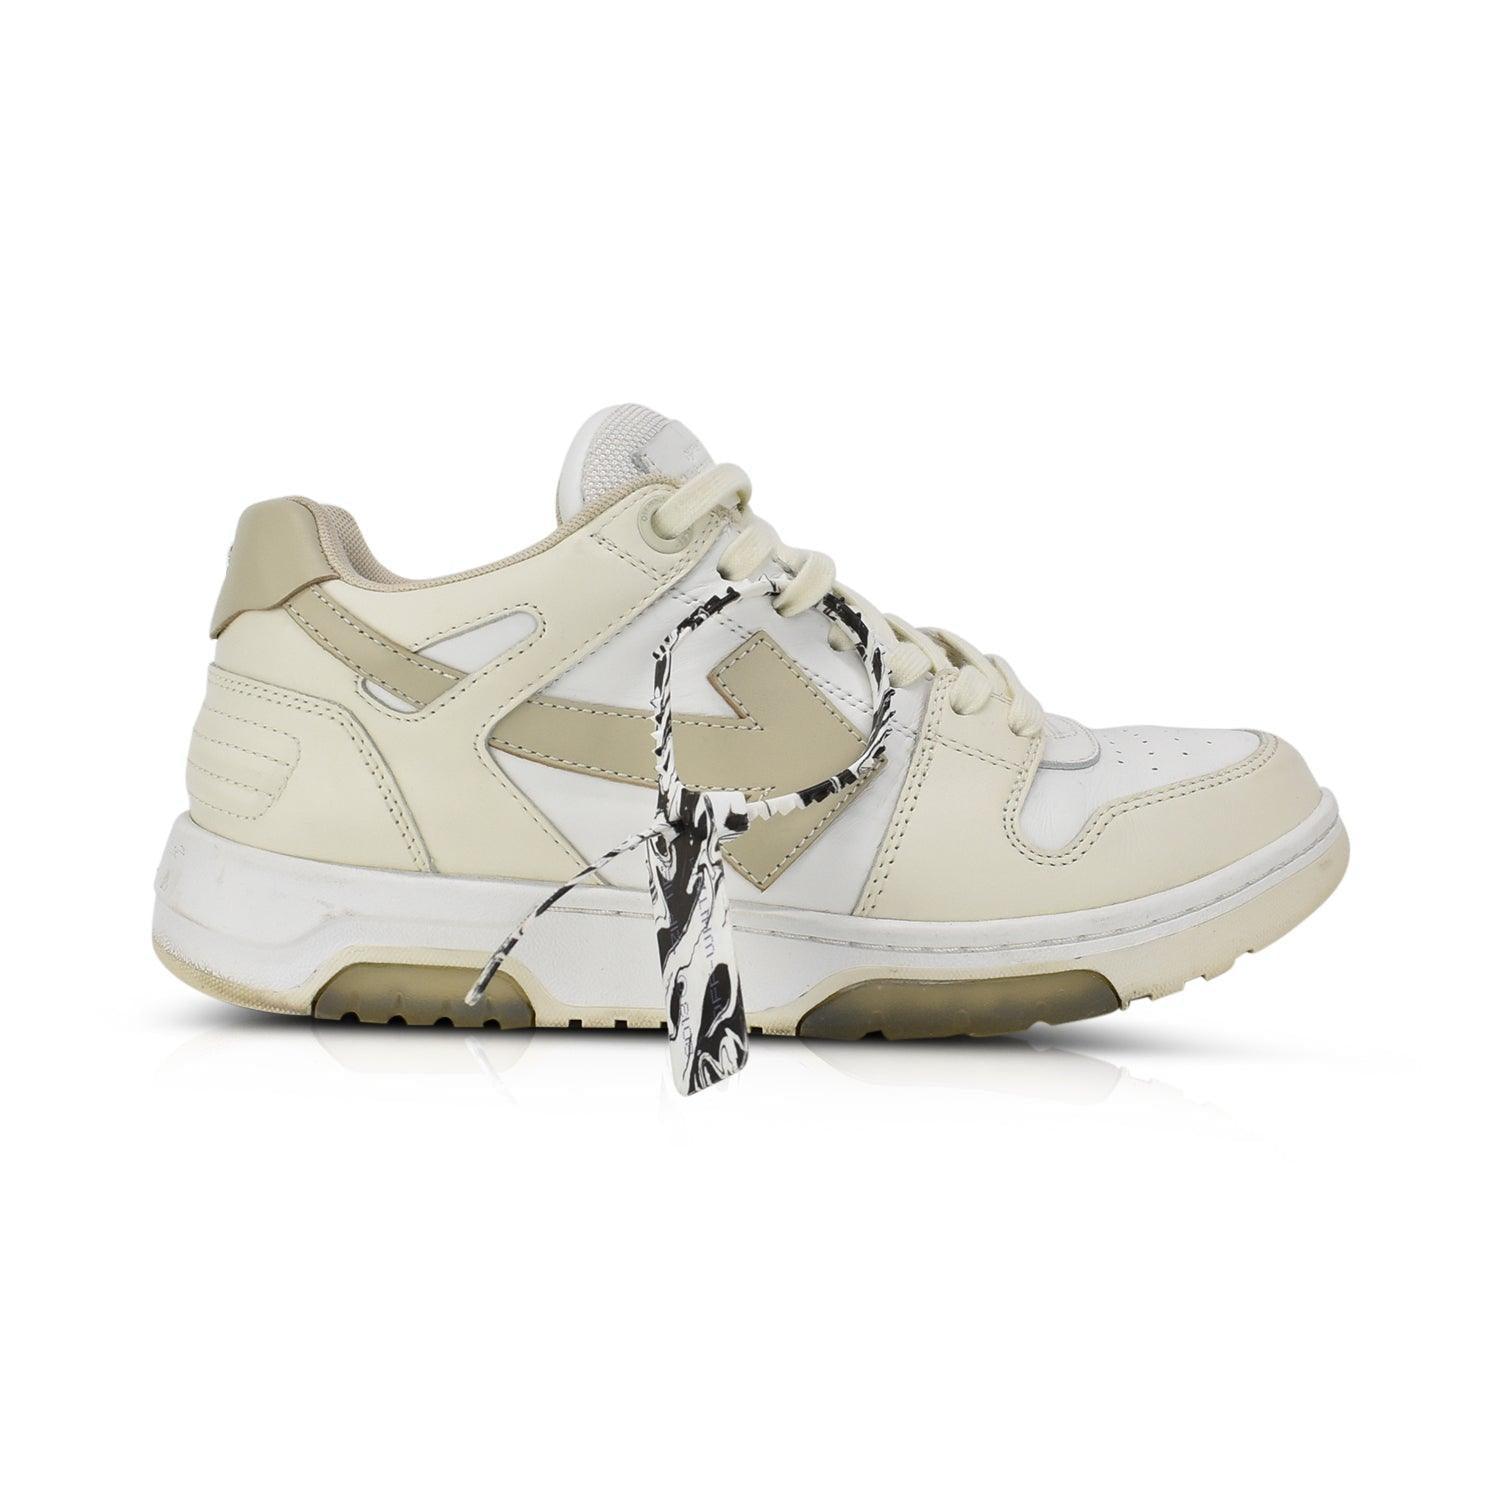 OFF WHITE Cream Mens SIZE 41 Shoes - Fashionably Yours